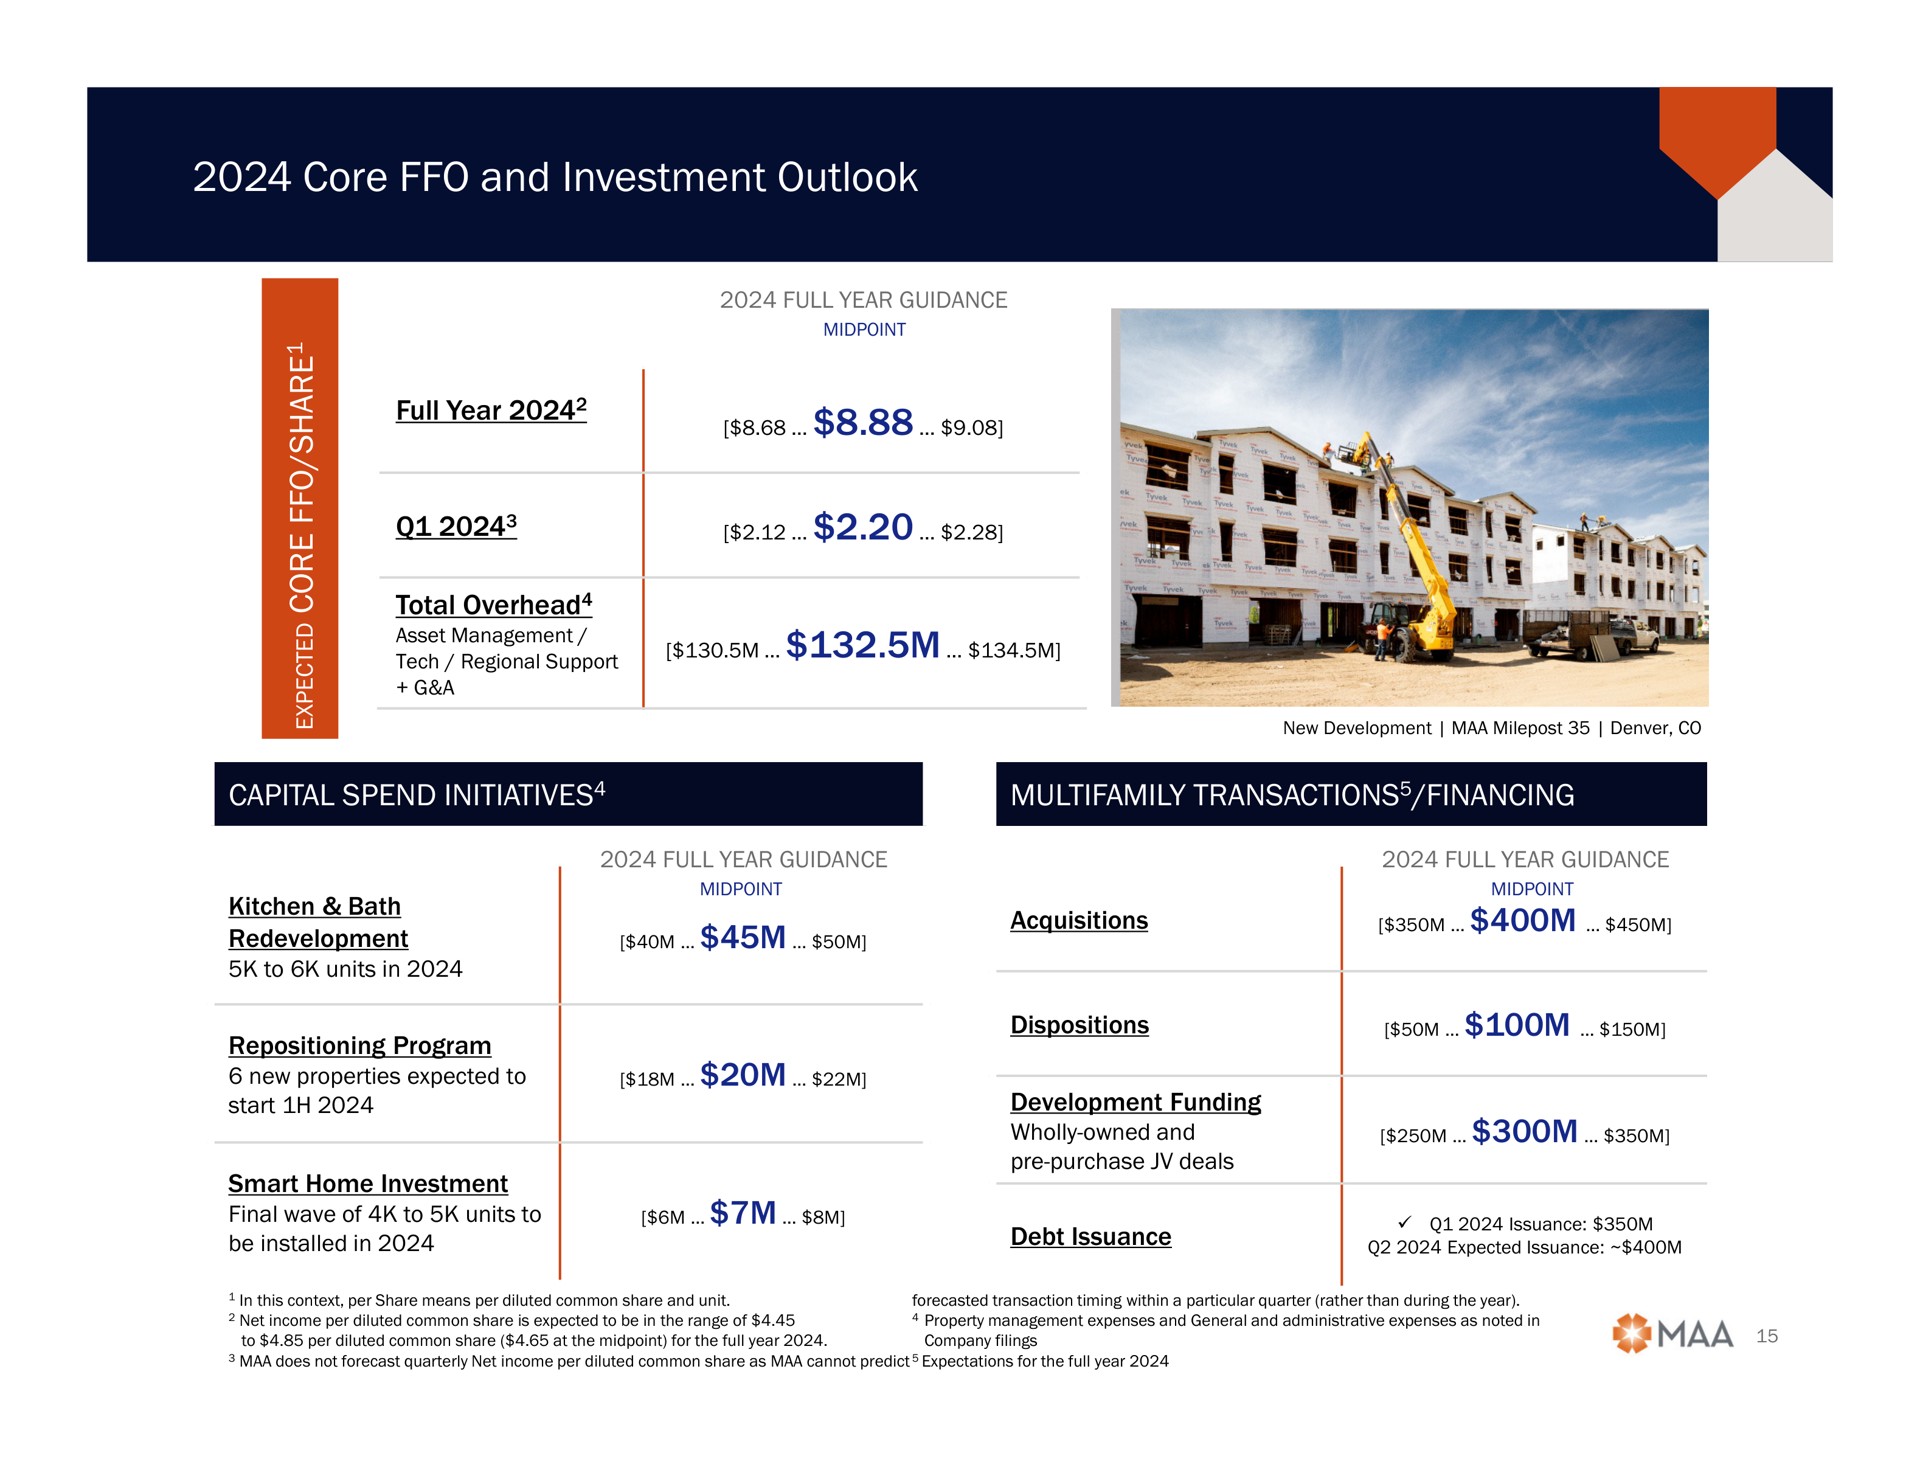 core and investment outlook tech regional support full year a i a | Mid-America Apartment Communities